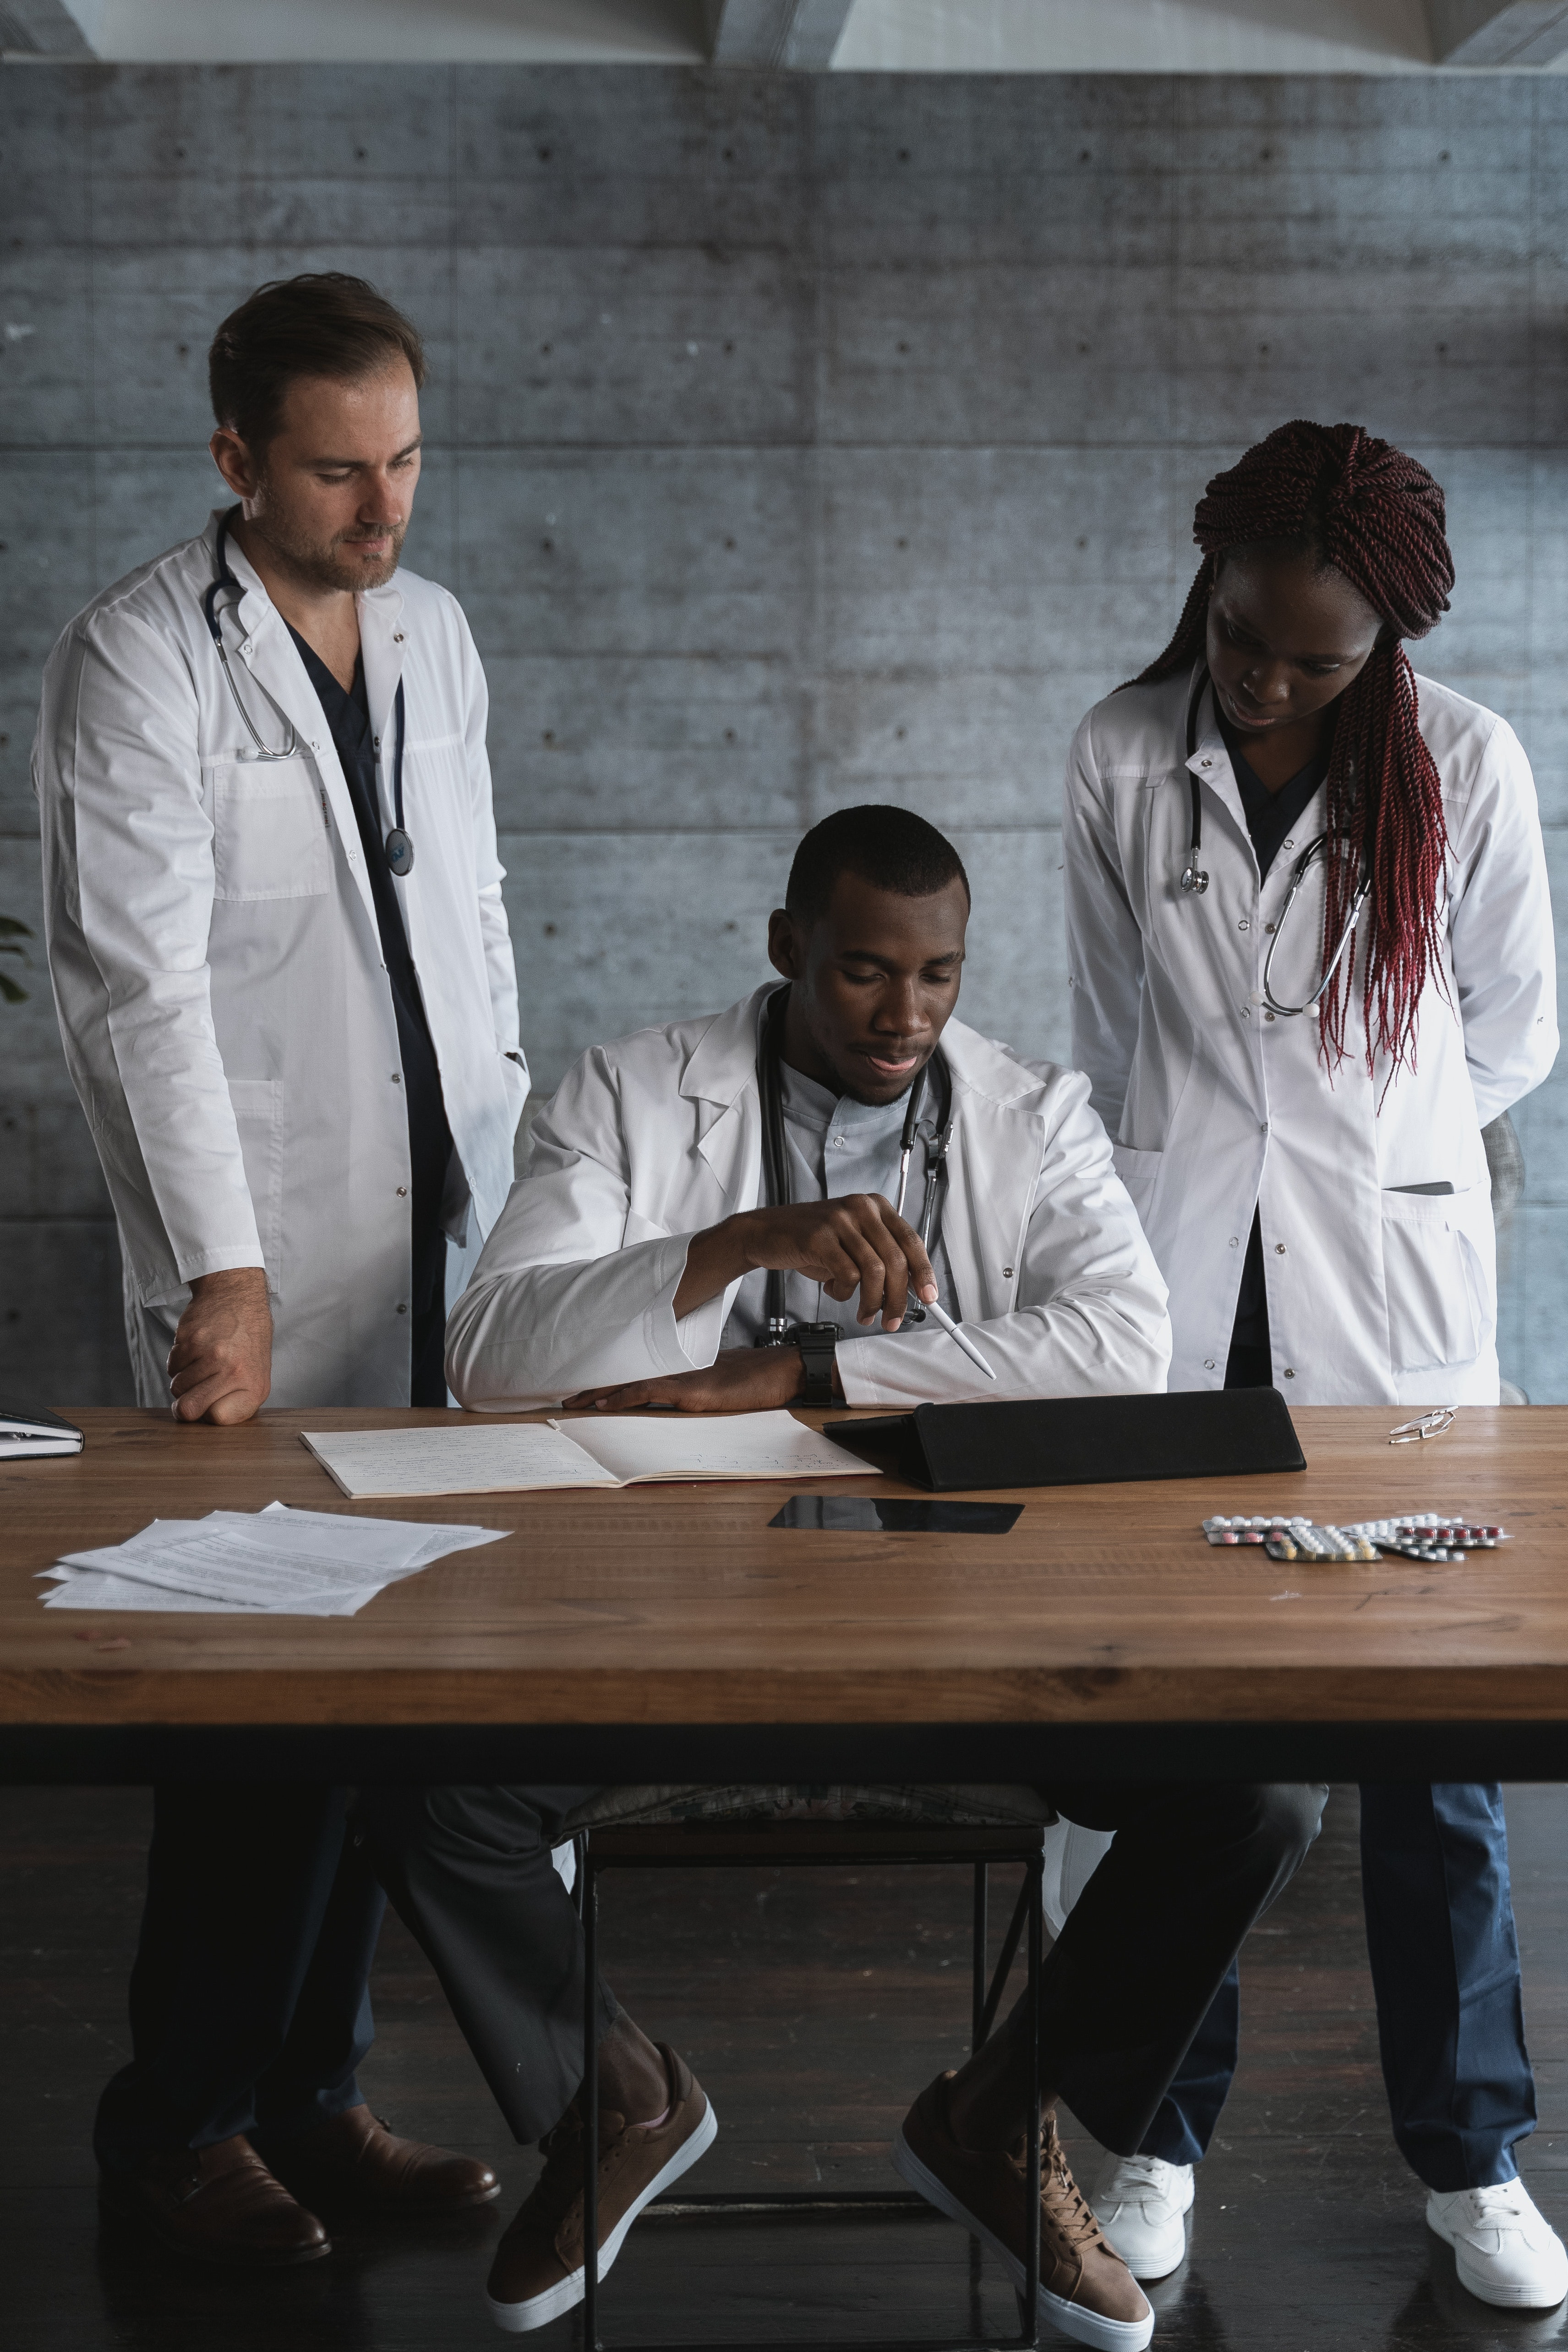 Three medical students in white lab coats collaborate on work around a table